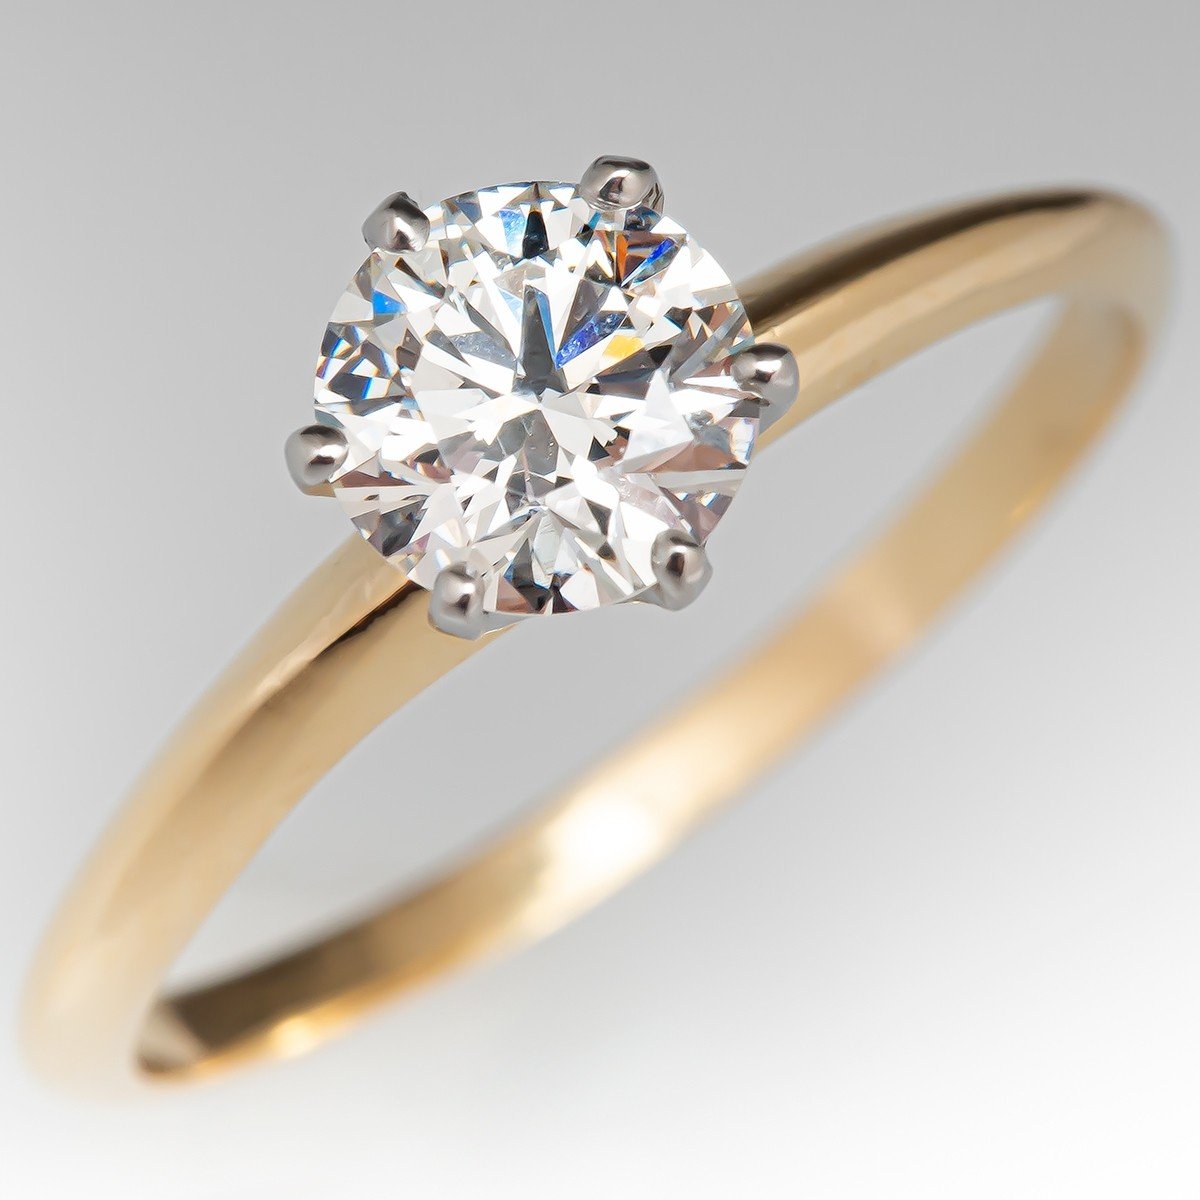 Tiffany & Co. Launches New Engagement Rings And The Diamond Source  Initiative - Weddingbells